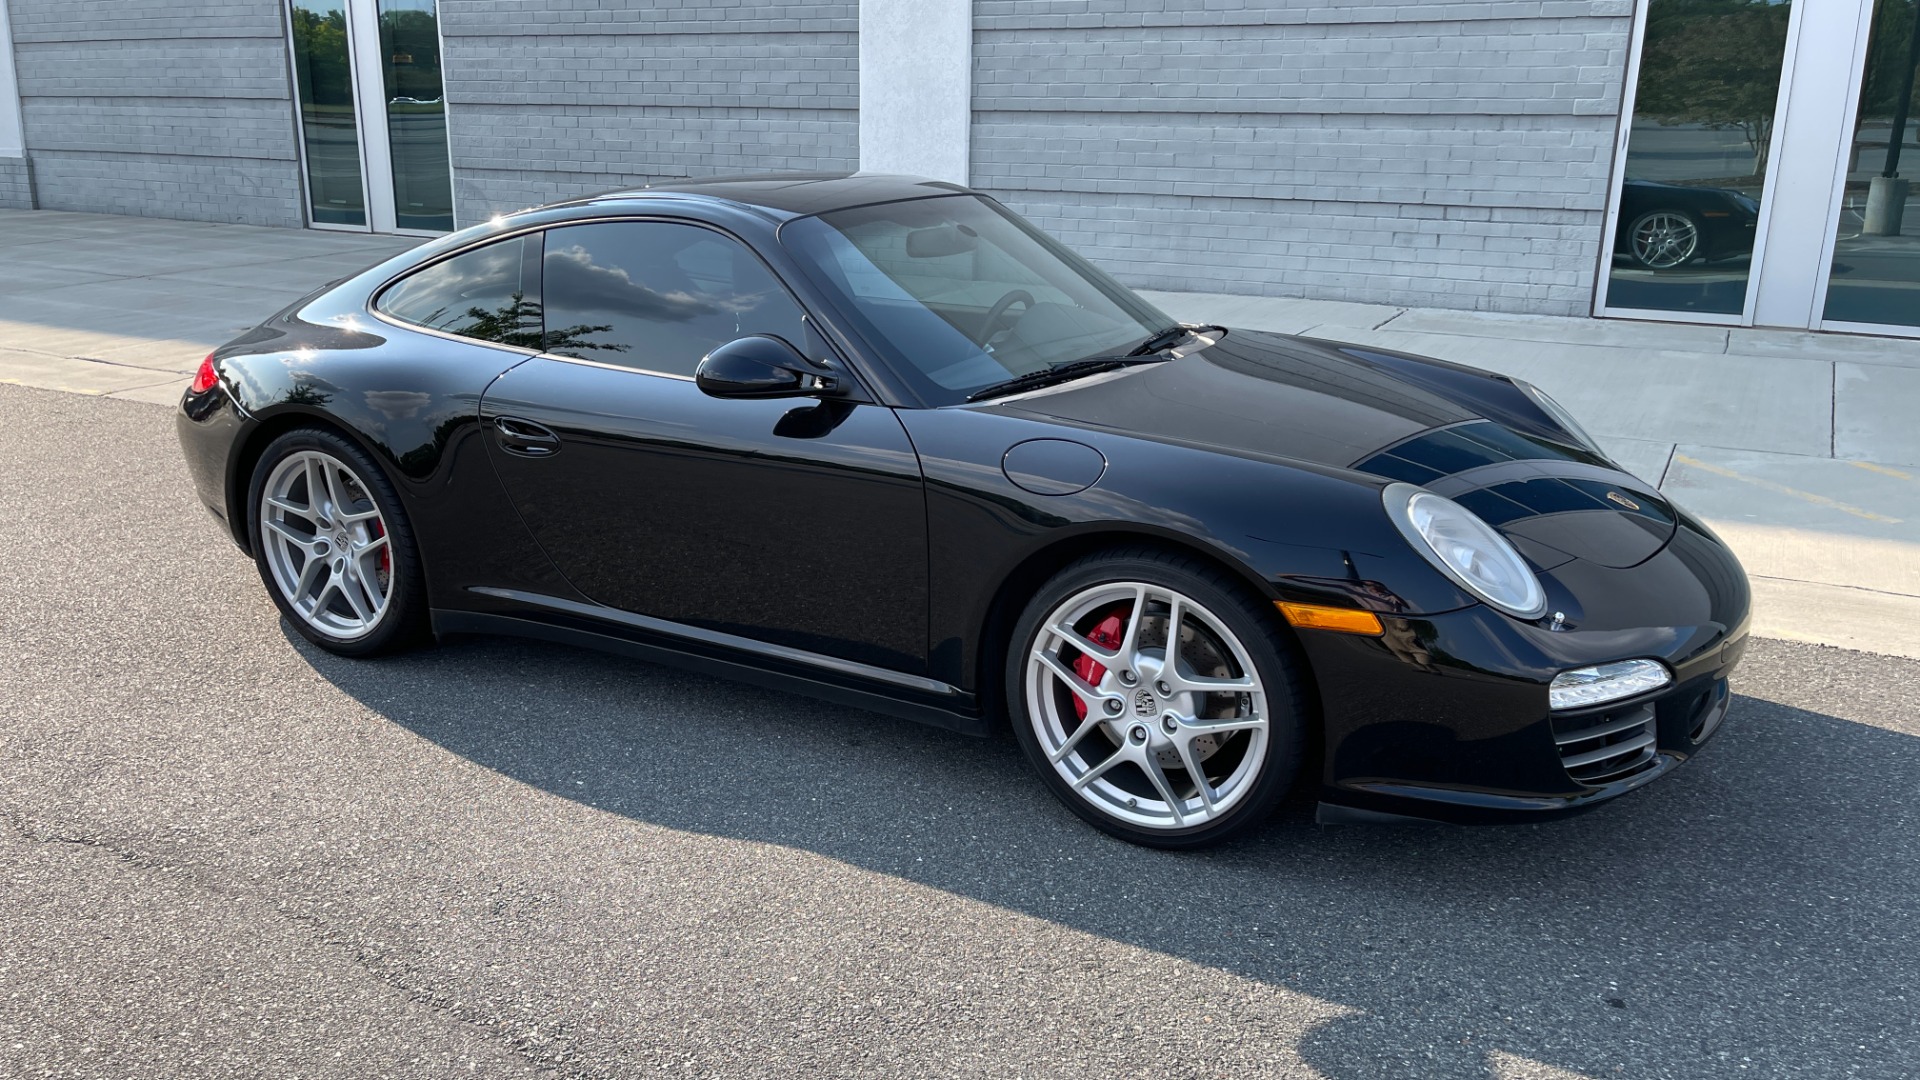 Used 2010 Porsche 911 Carrera 4S / PDK / LEATHER / BLUETOOTH / VENTILATED SEATS / BOSE SOUND for sale $77,995 at Formula Imports in Charlotte NC 28227 4